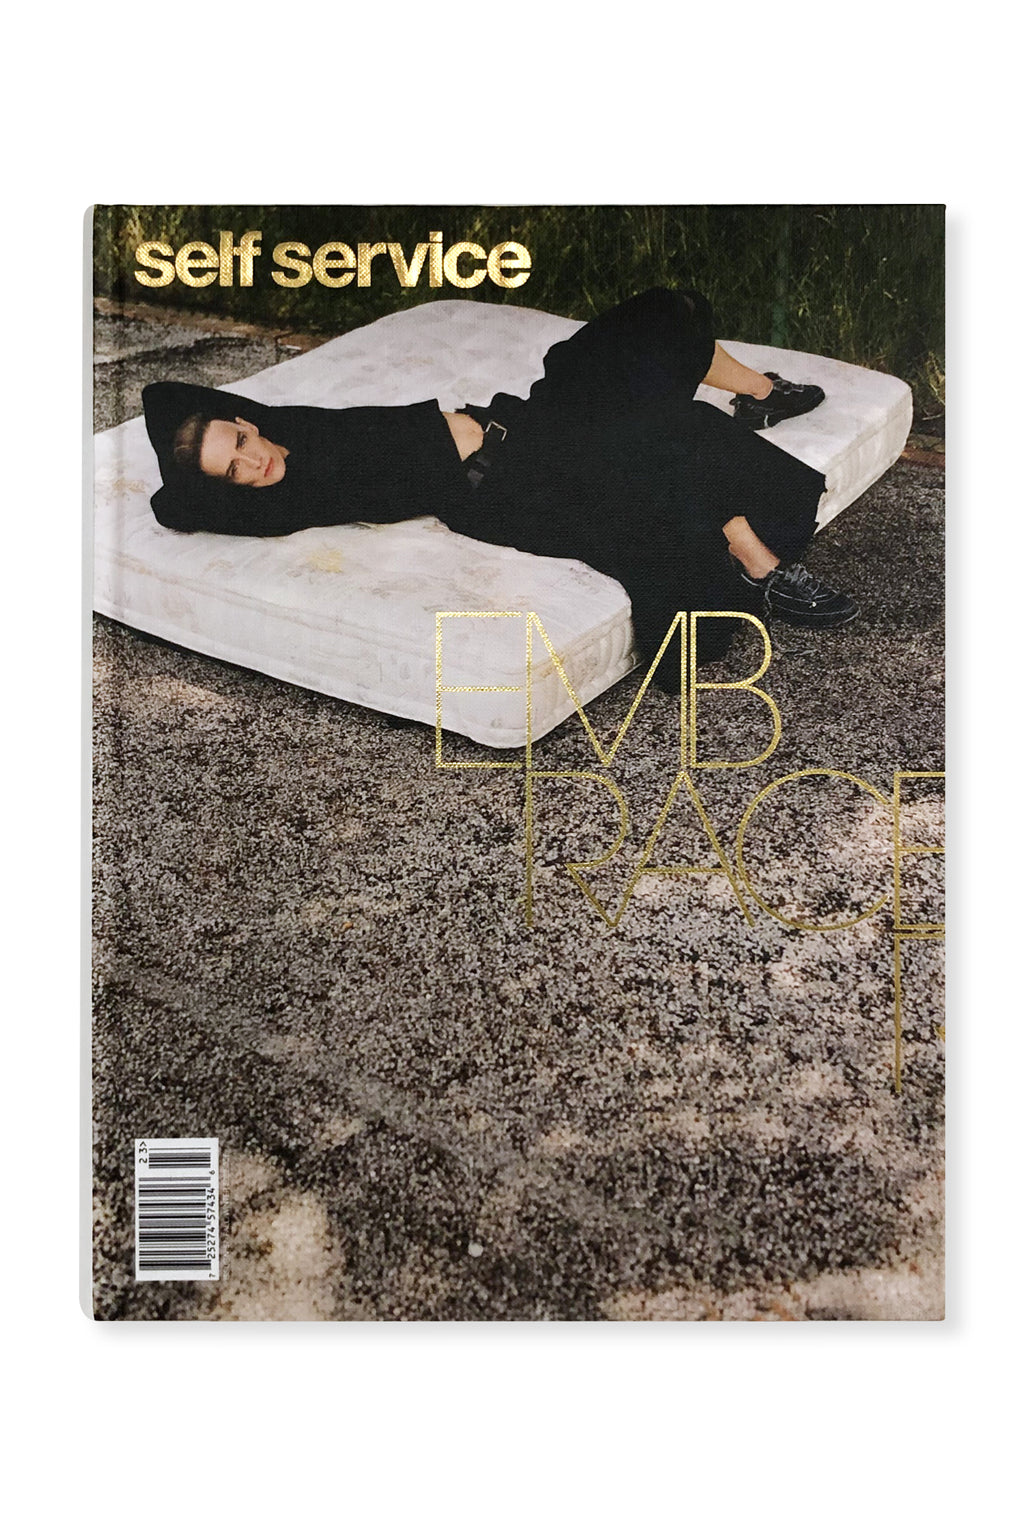 Self Service, Issue 57